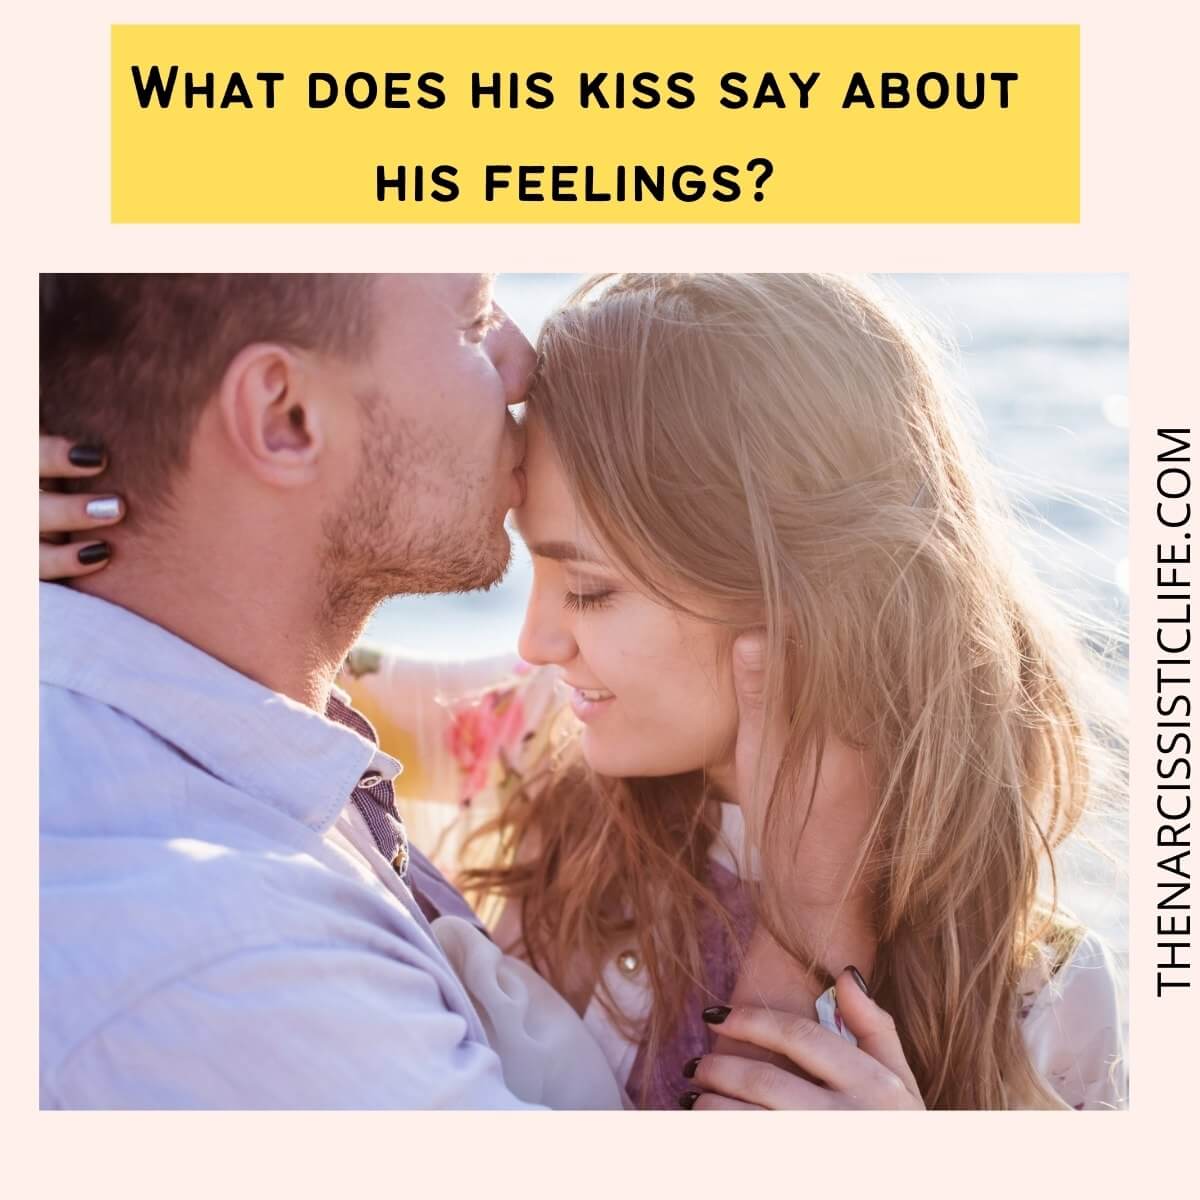 Okay, so let’s say he just kissed you, what does his kiss mean? 